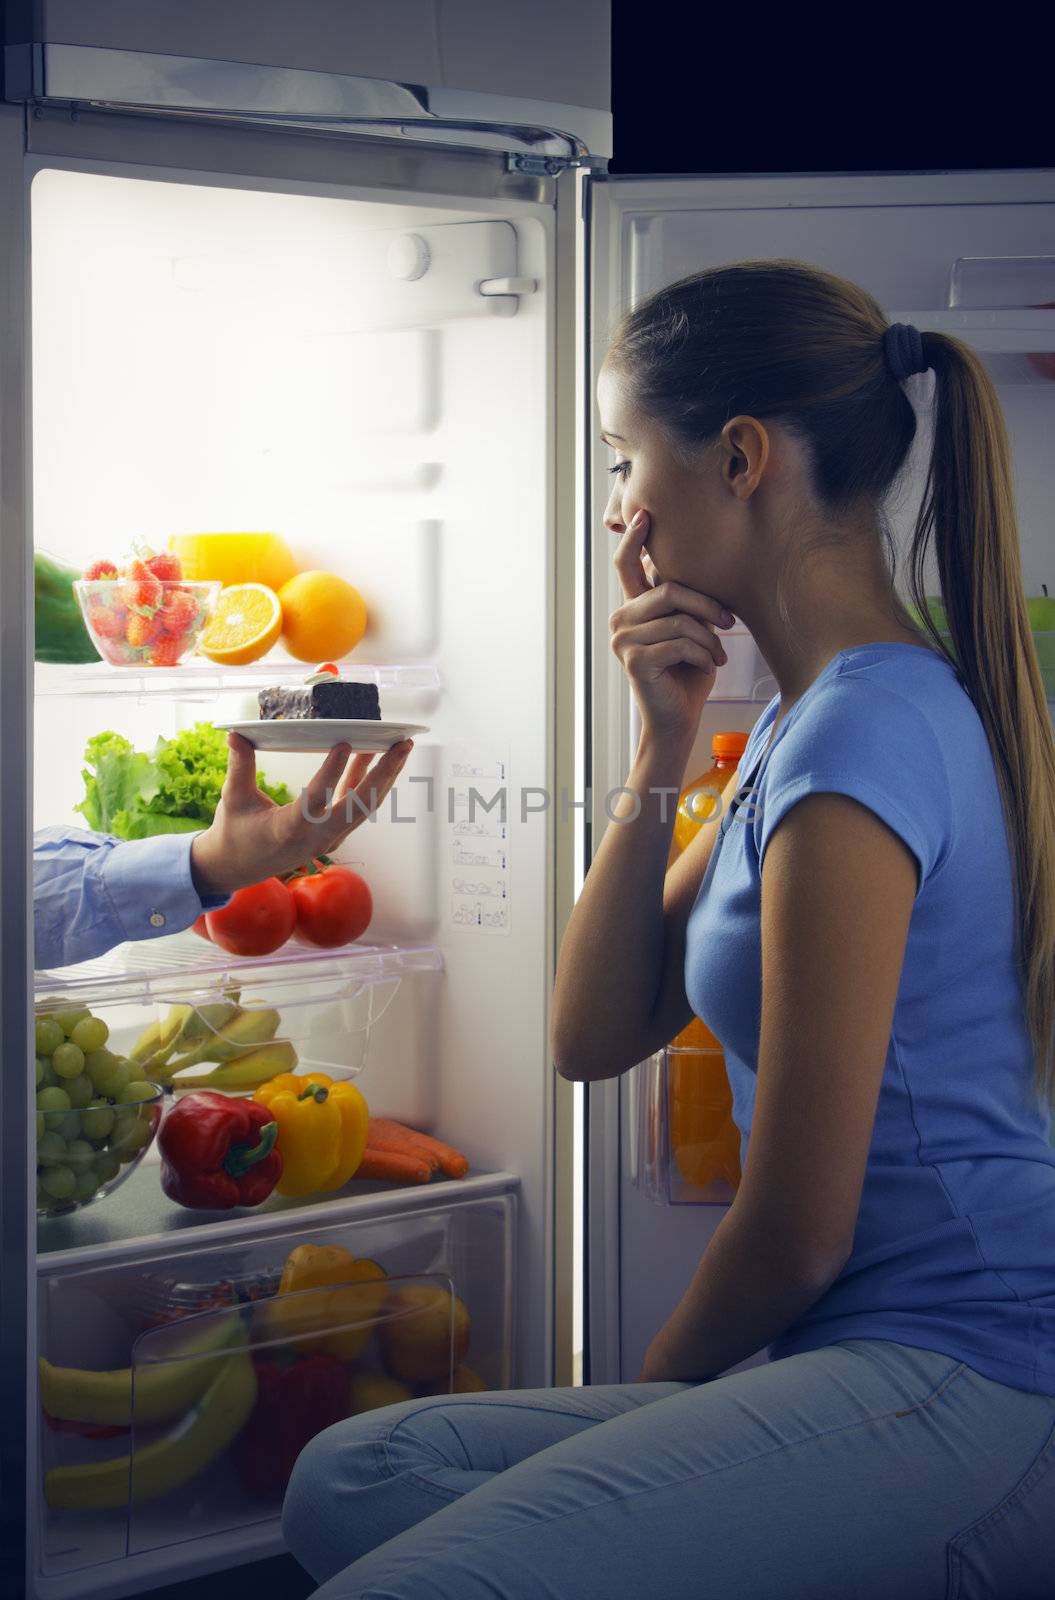 Woman contemplating if she should ruin her diet